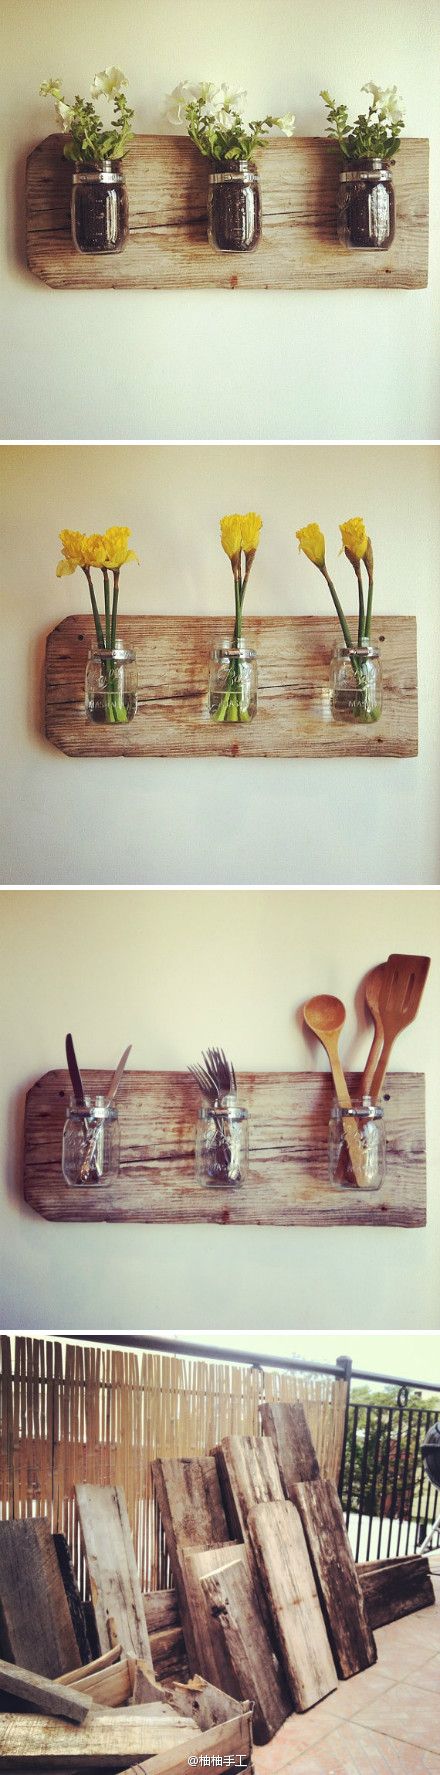 Awesome way to recycle wood and mason jars!